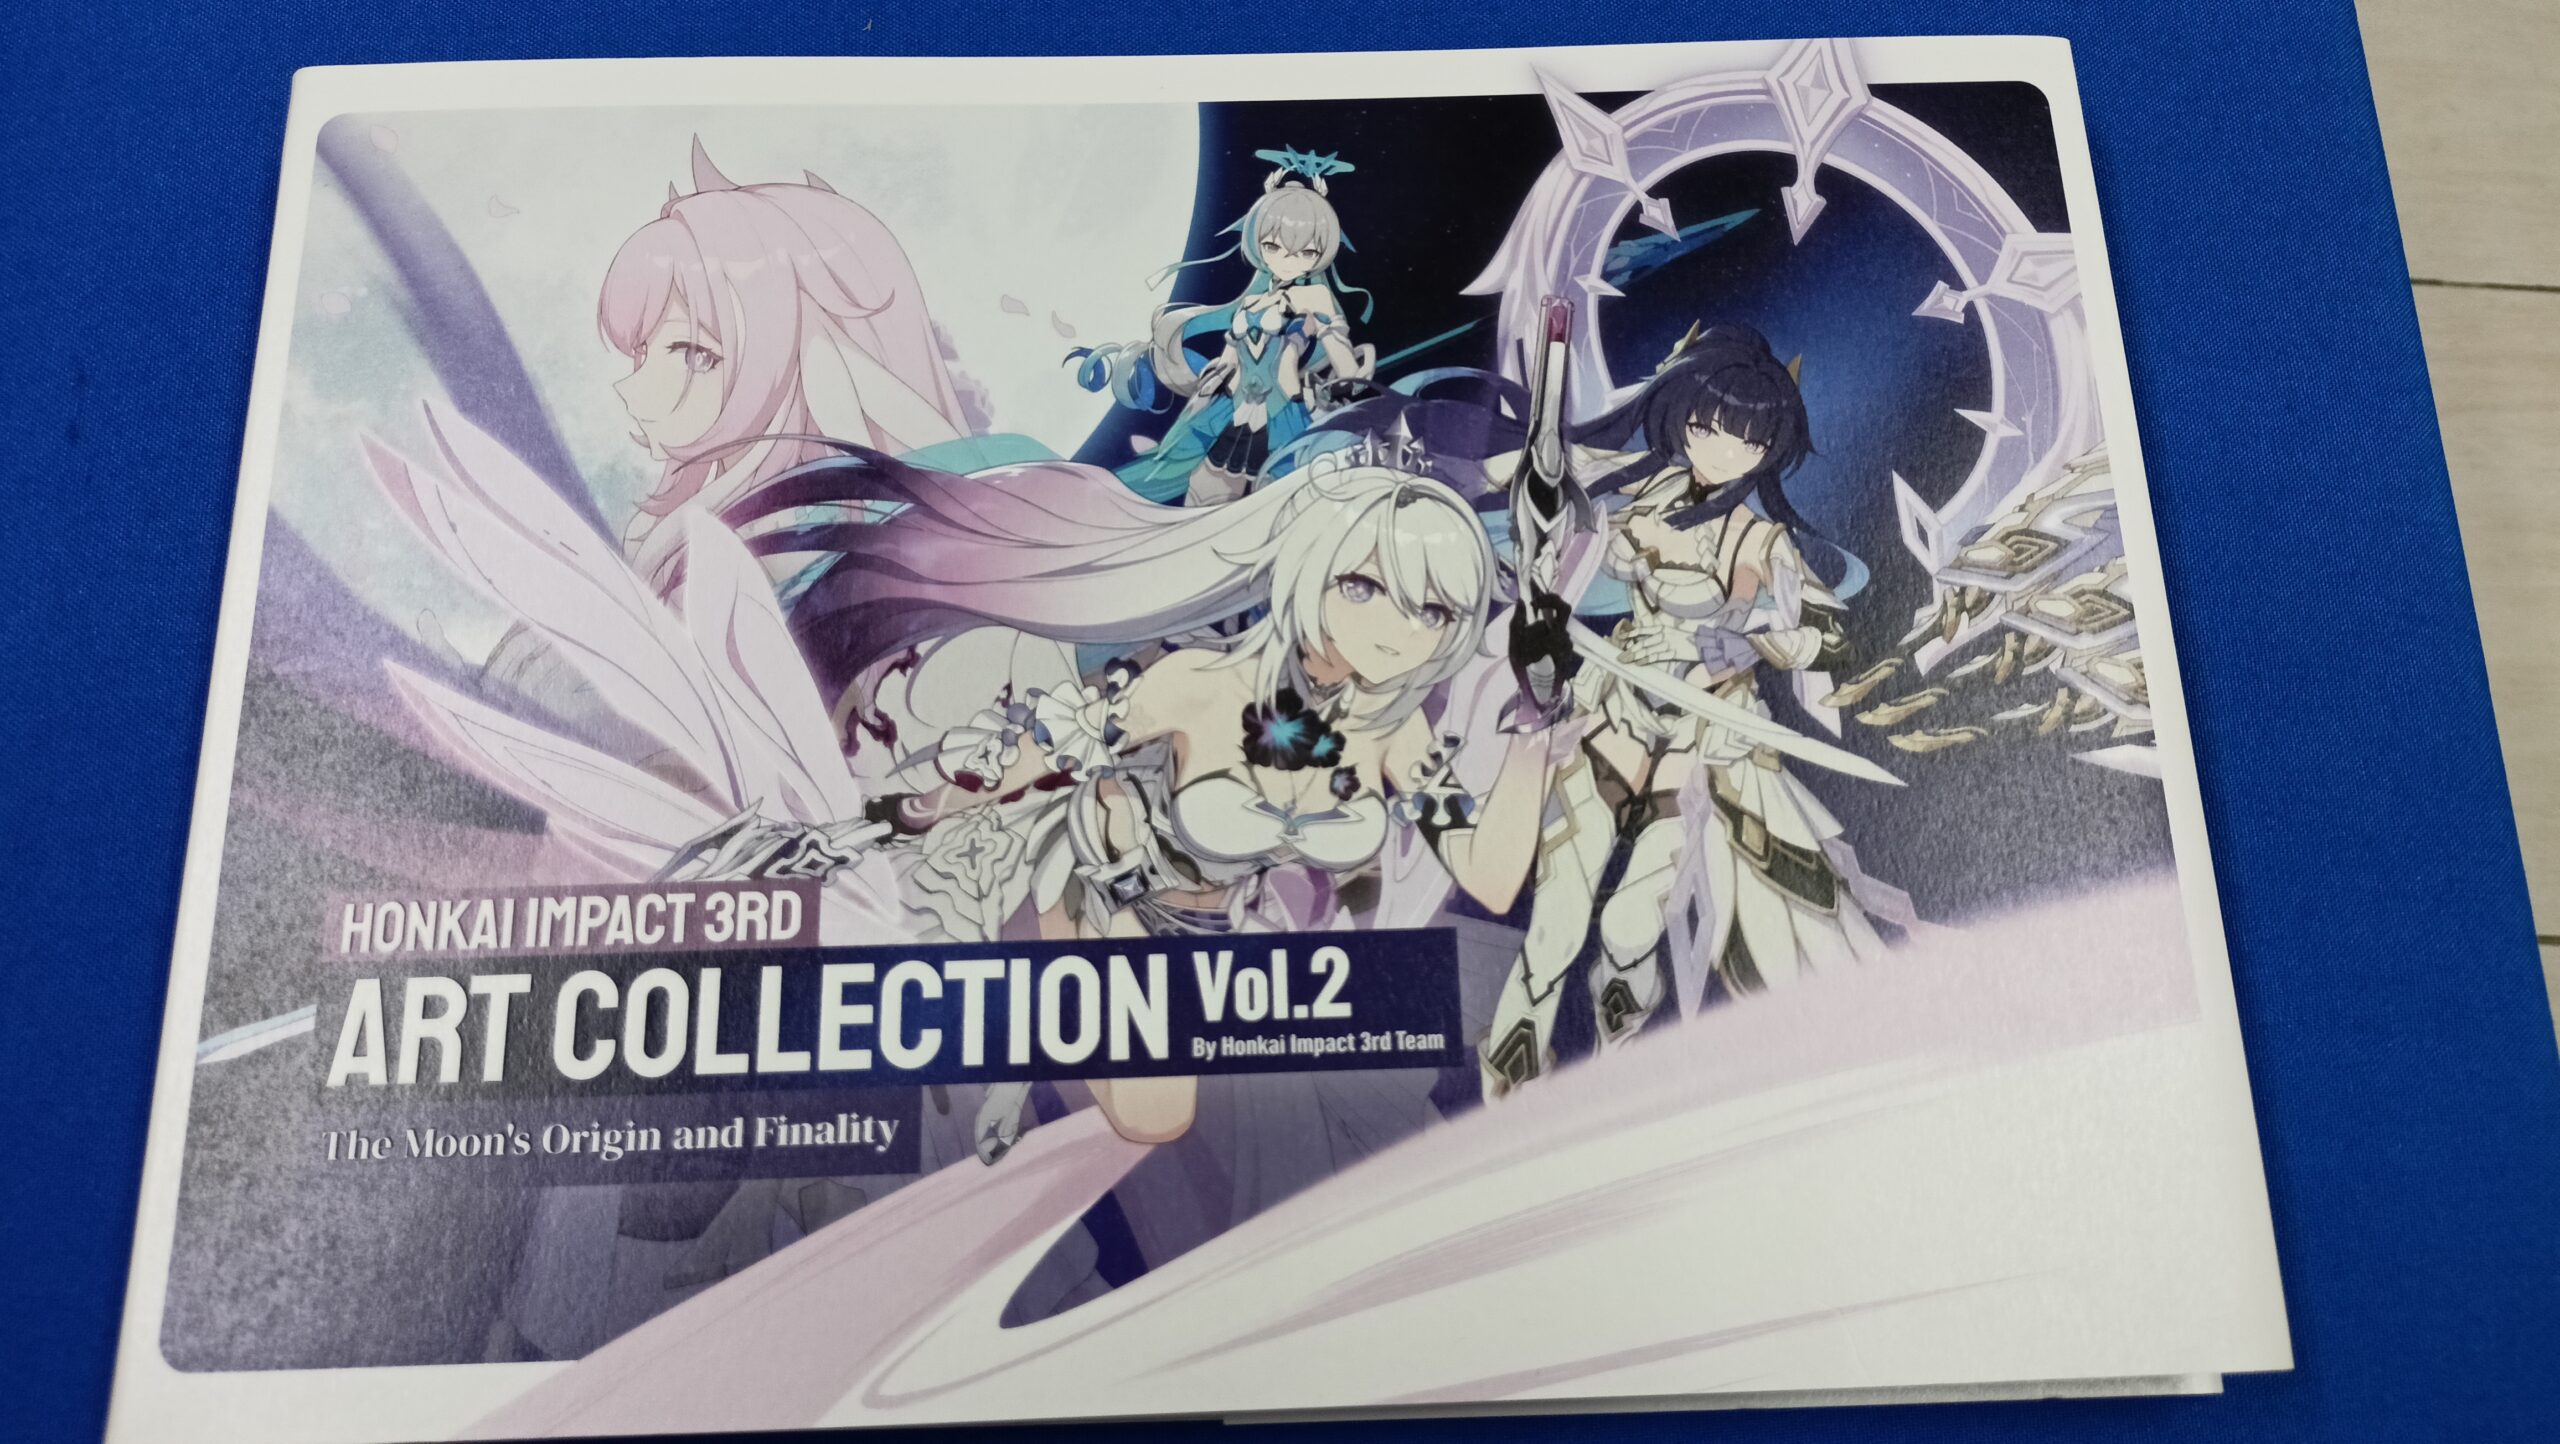 Honkai-Impact-3rd-Art-Collection-Volume-2-Now-Available-in-the-Philippines!-cover